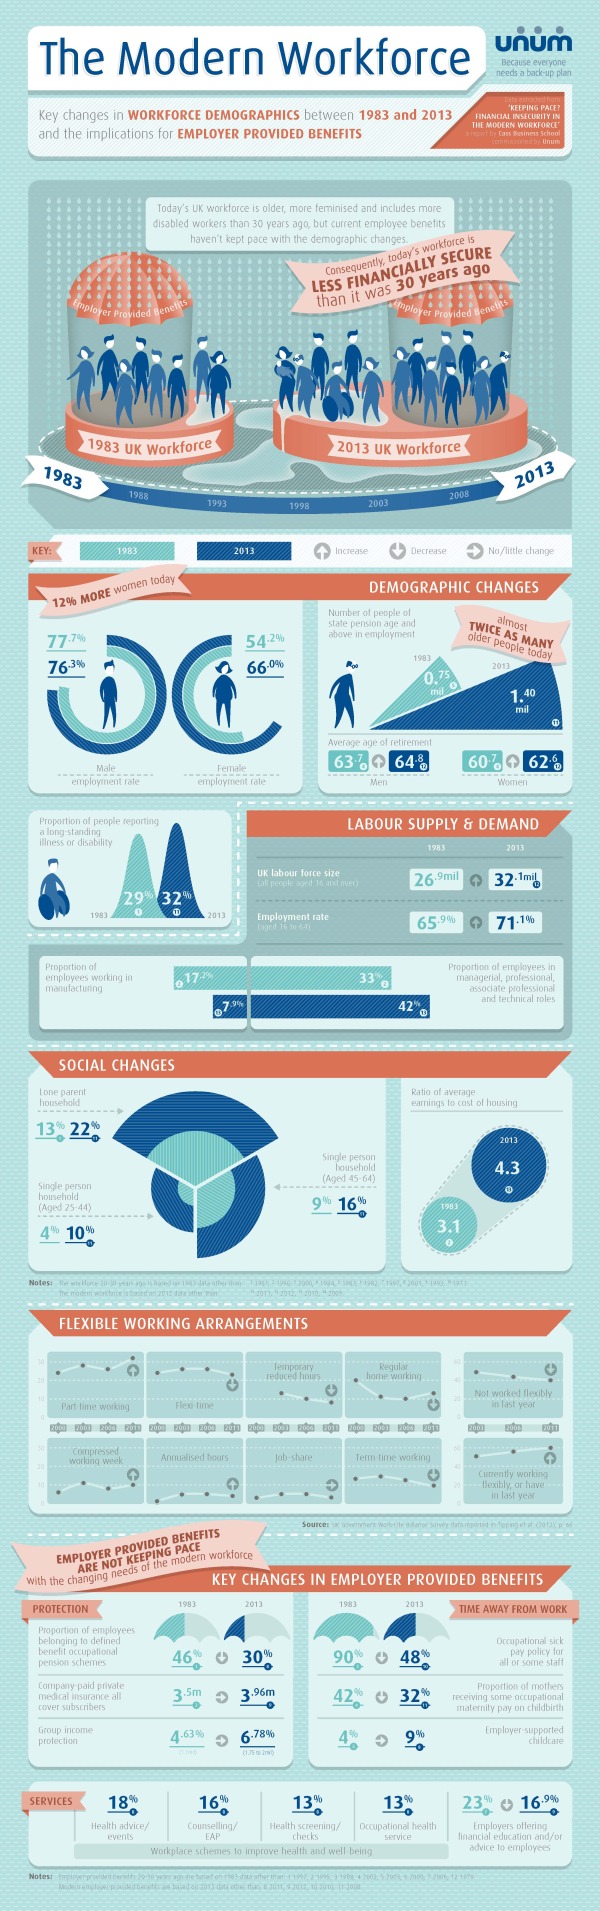 The Modern Workforce infographic